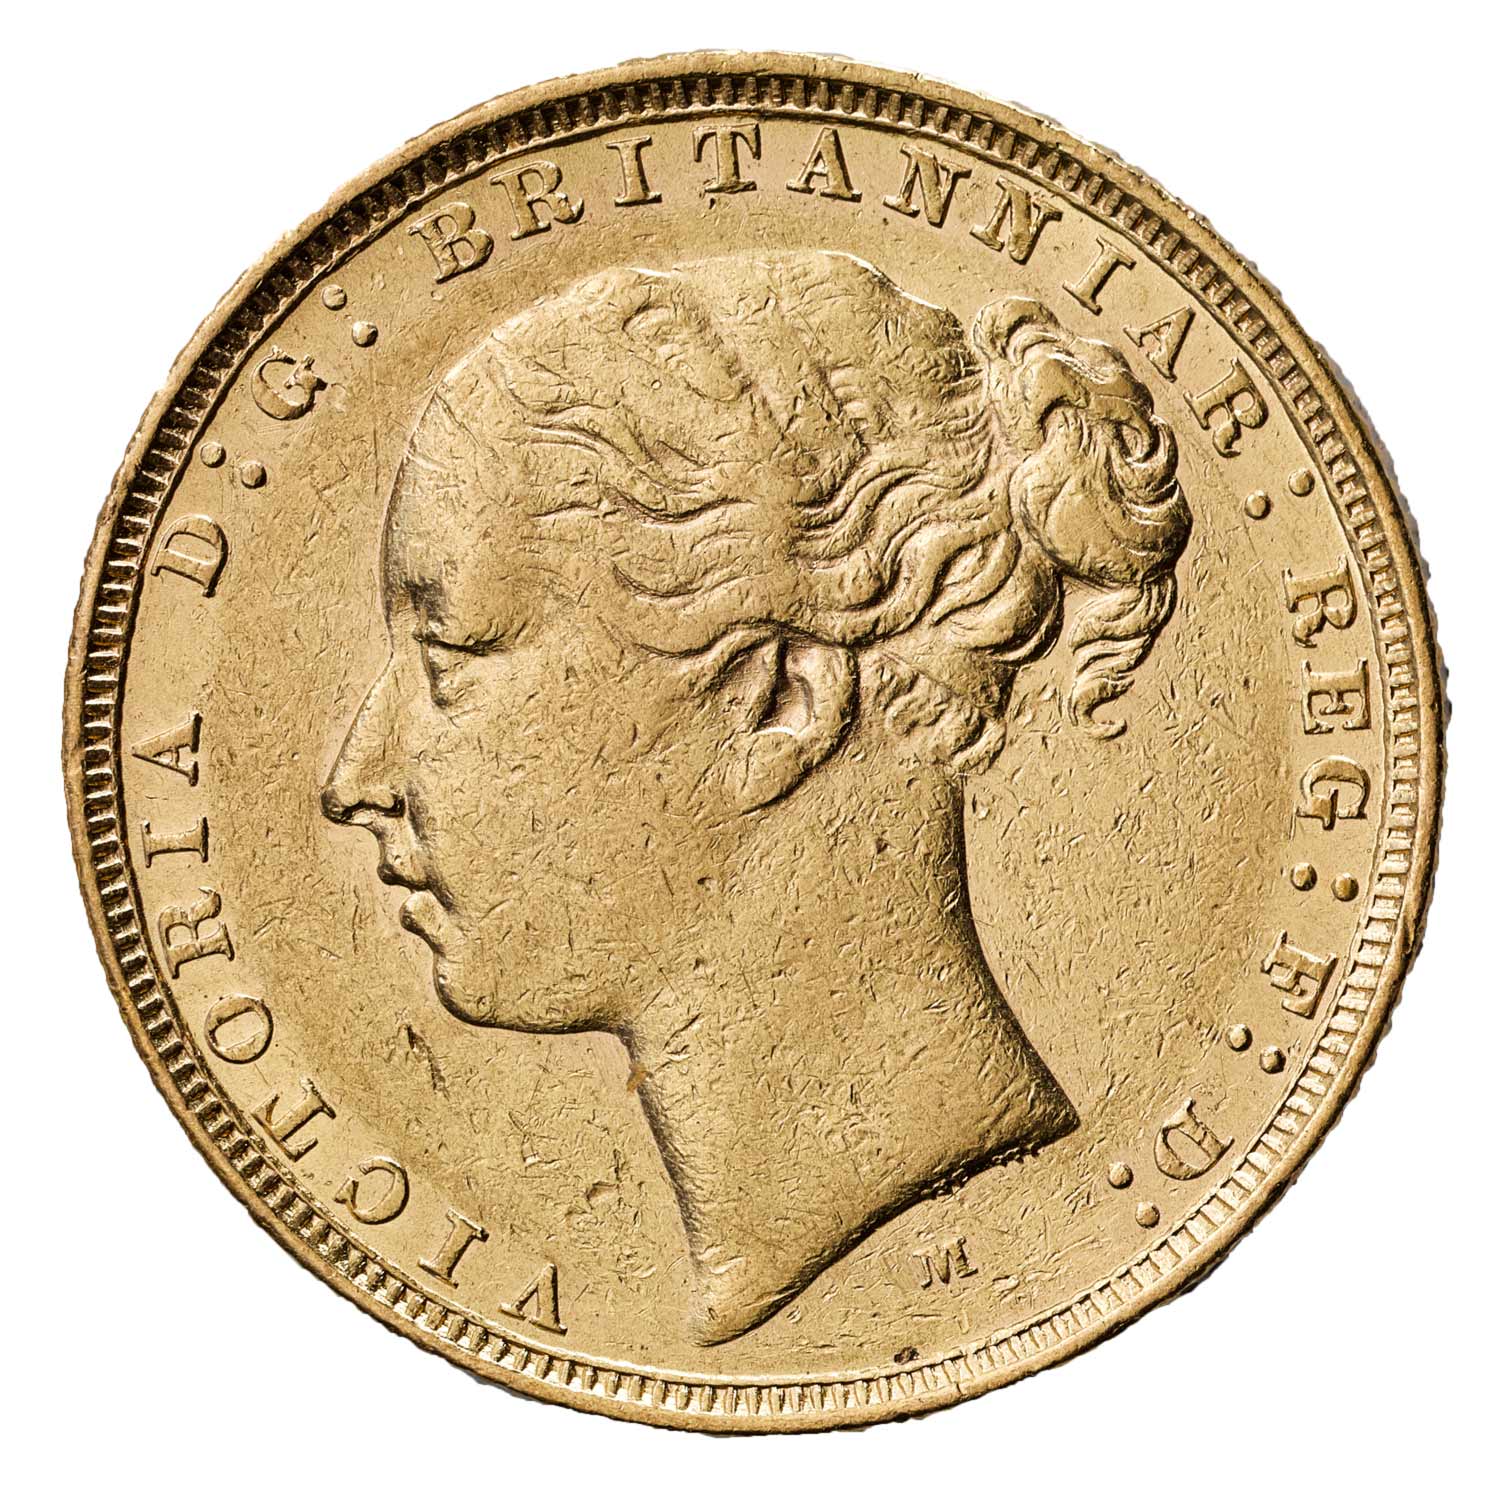 Details about   1868 GREAT BRITAIN UK Queen Victoria Gold Sovereign Coin St George NGC i80930 